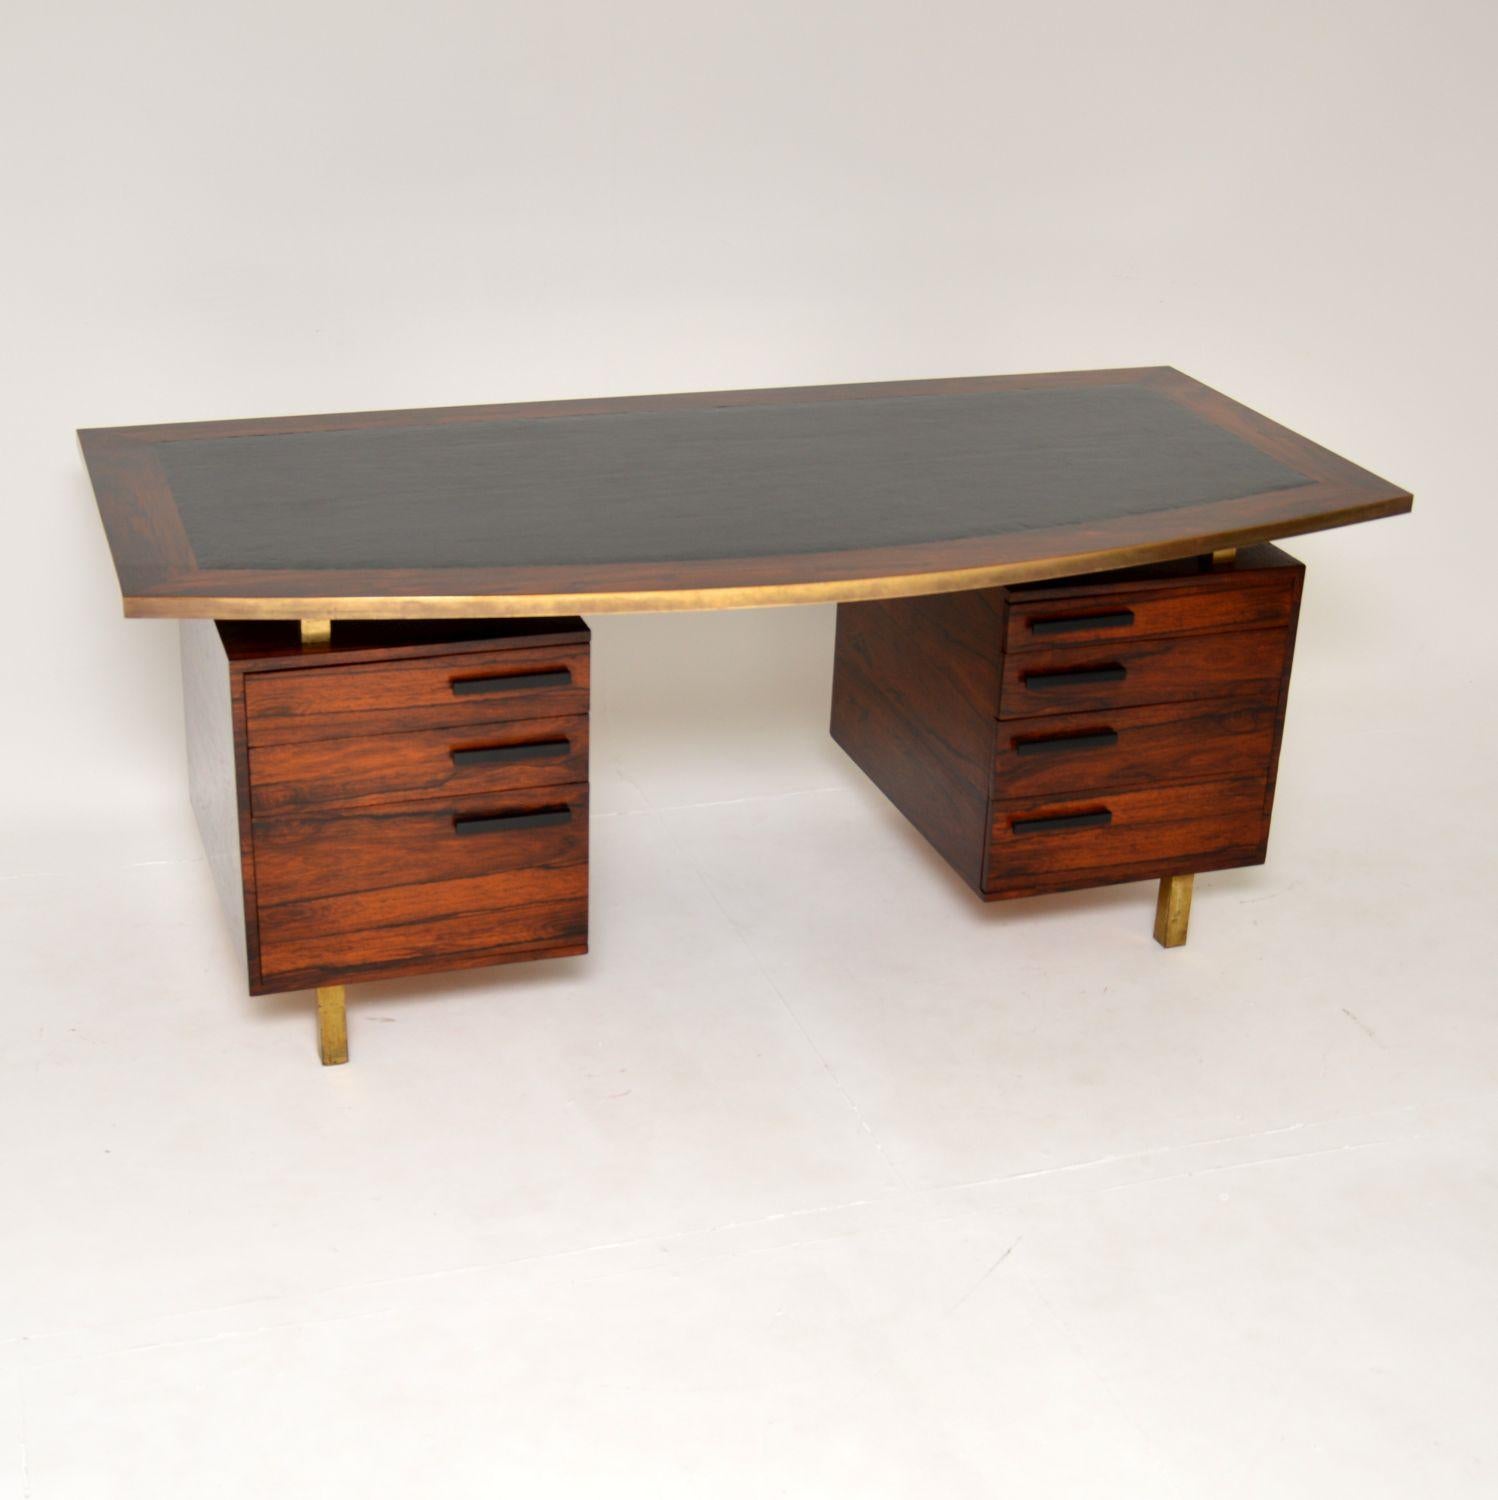 An absolutely magnificent executive desk of the highest order. This was made in England, it dates from the 1960’s.

This is very large and impressive, with an amazing and quite unusual design. The top has a bow shaped front, and a very high